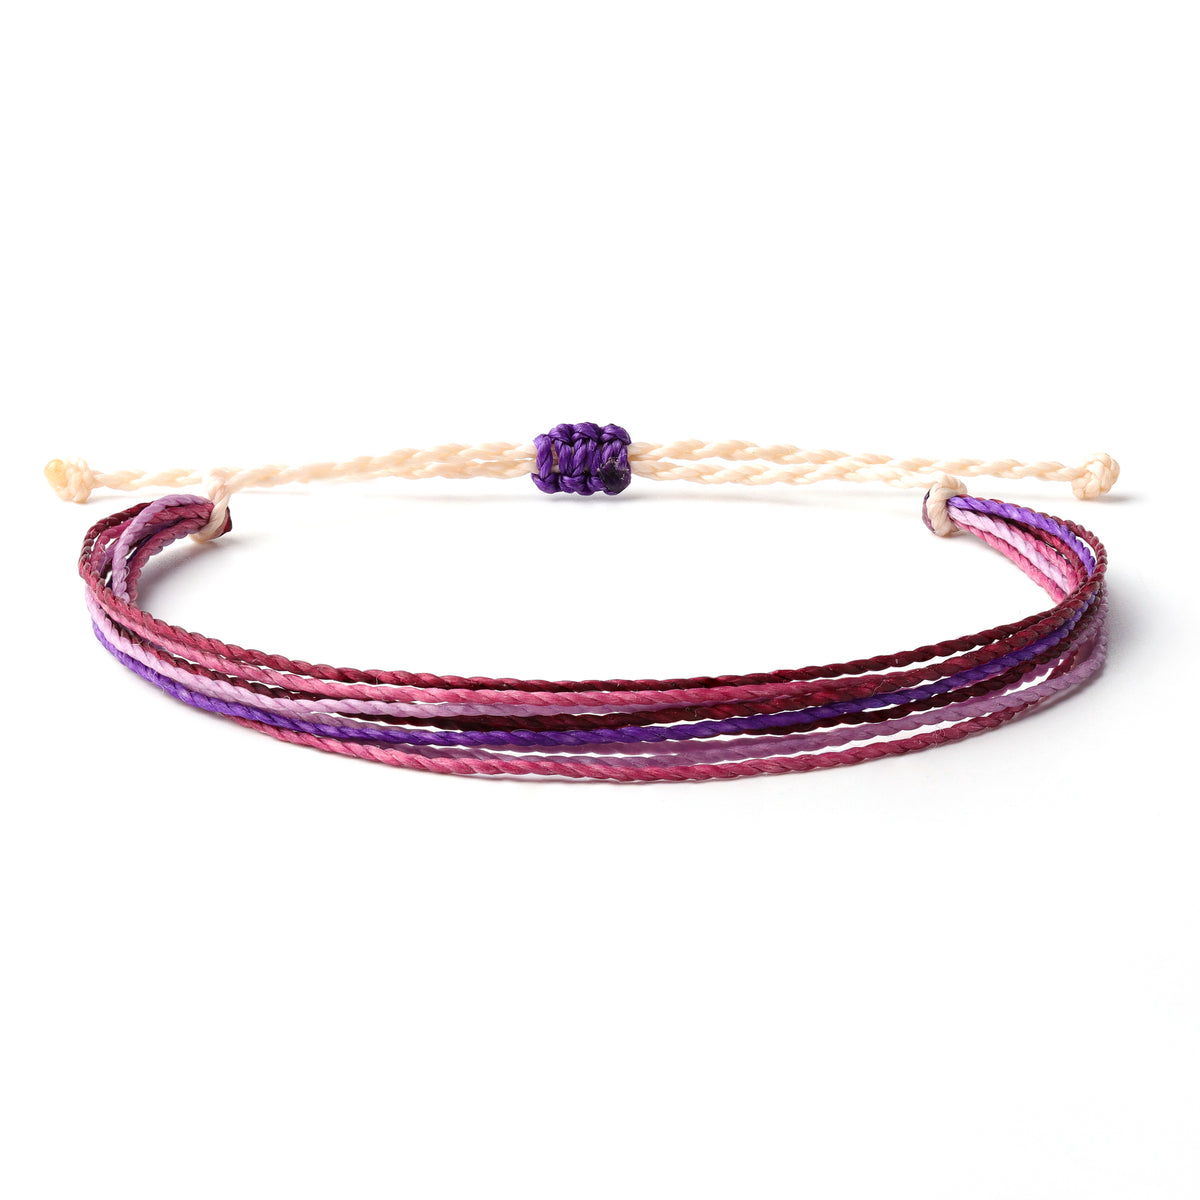 Threaded String Waterproof Wax Bracelet with colors white, bright purple, pastel purple and pink